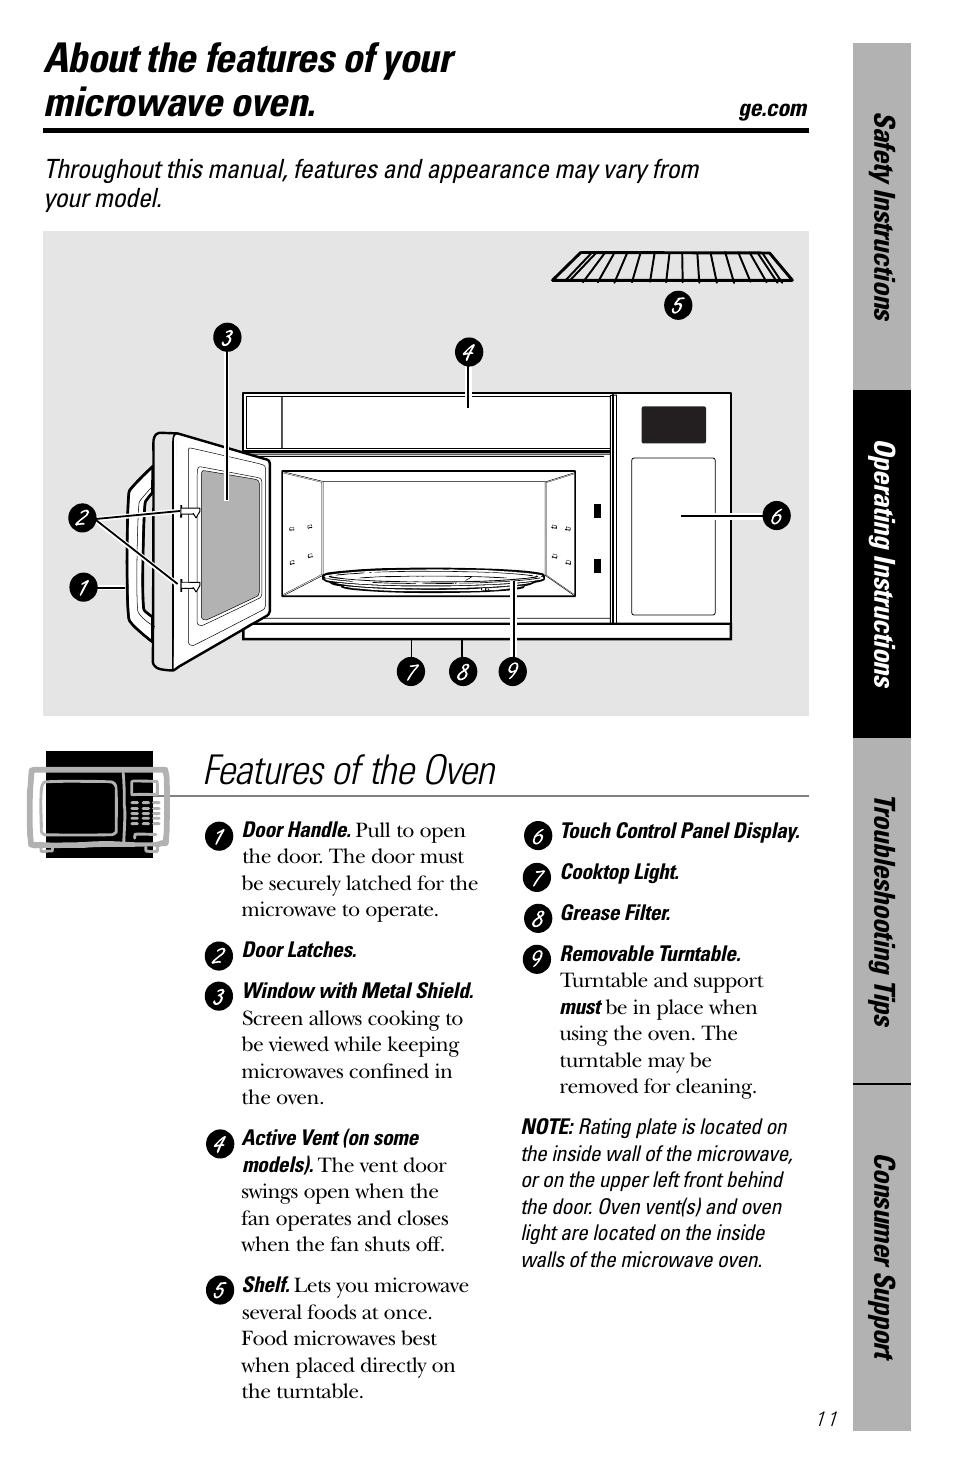 Features of your microwave oven, Features of your microwave oven , 12